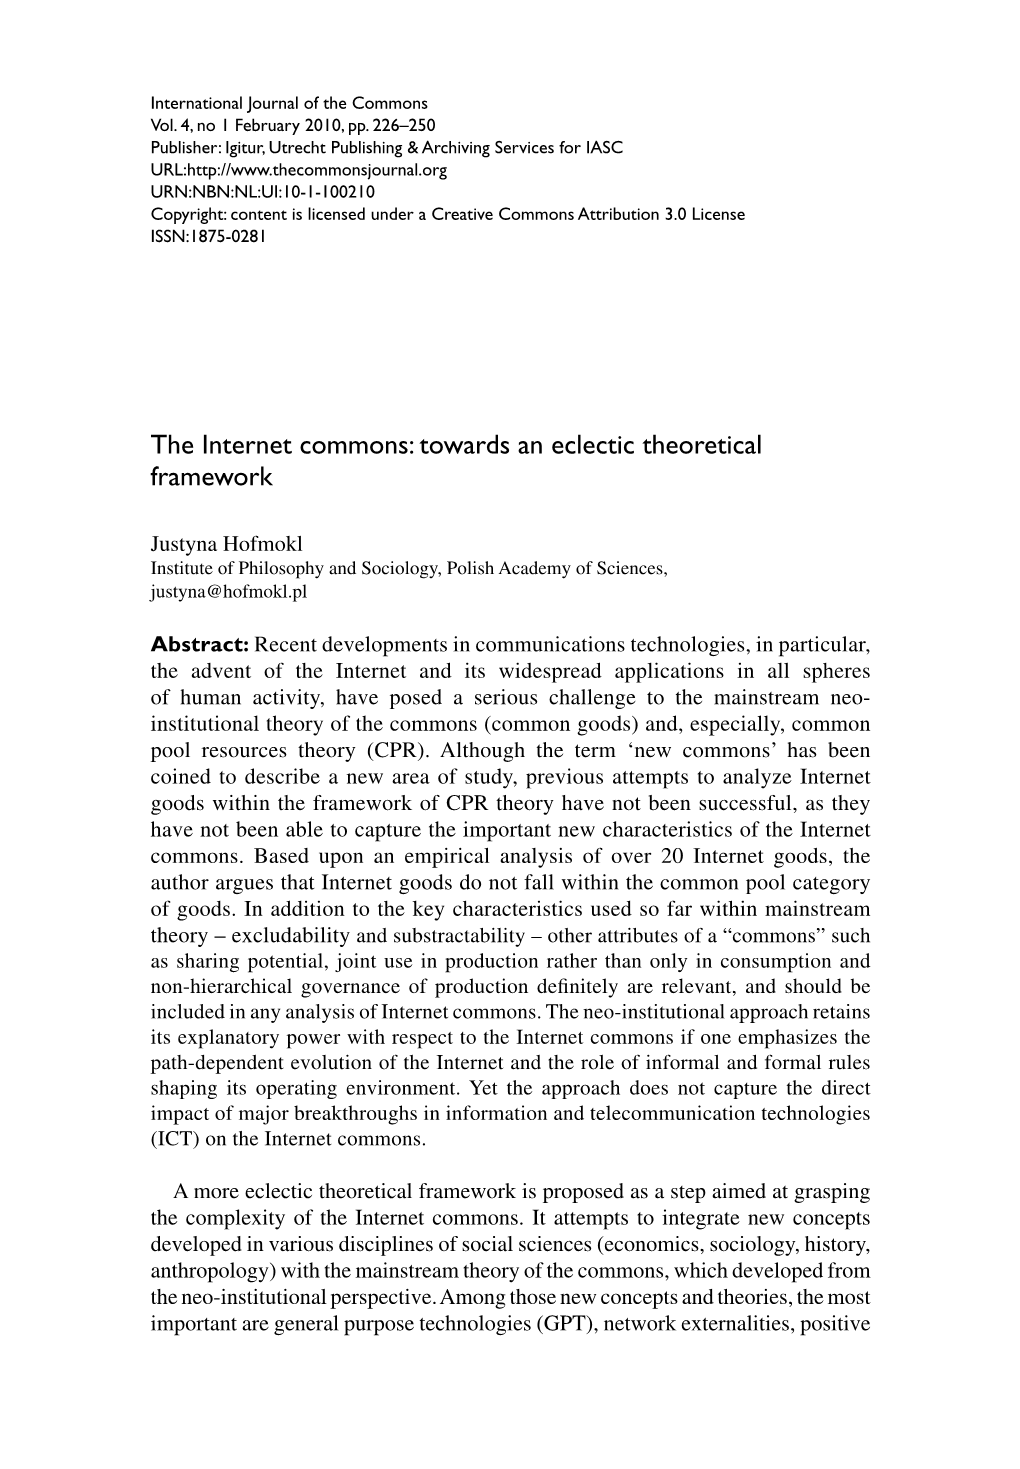 The Internet Commons: Towards an Eclectic Theoretical Framework